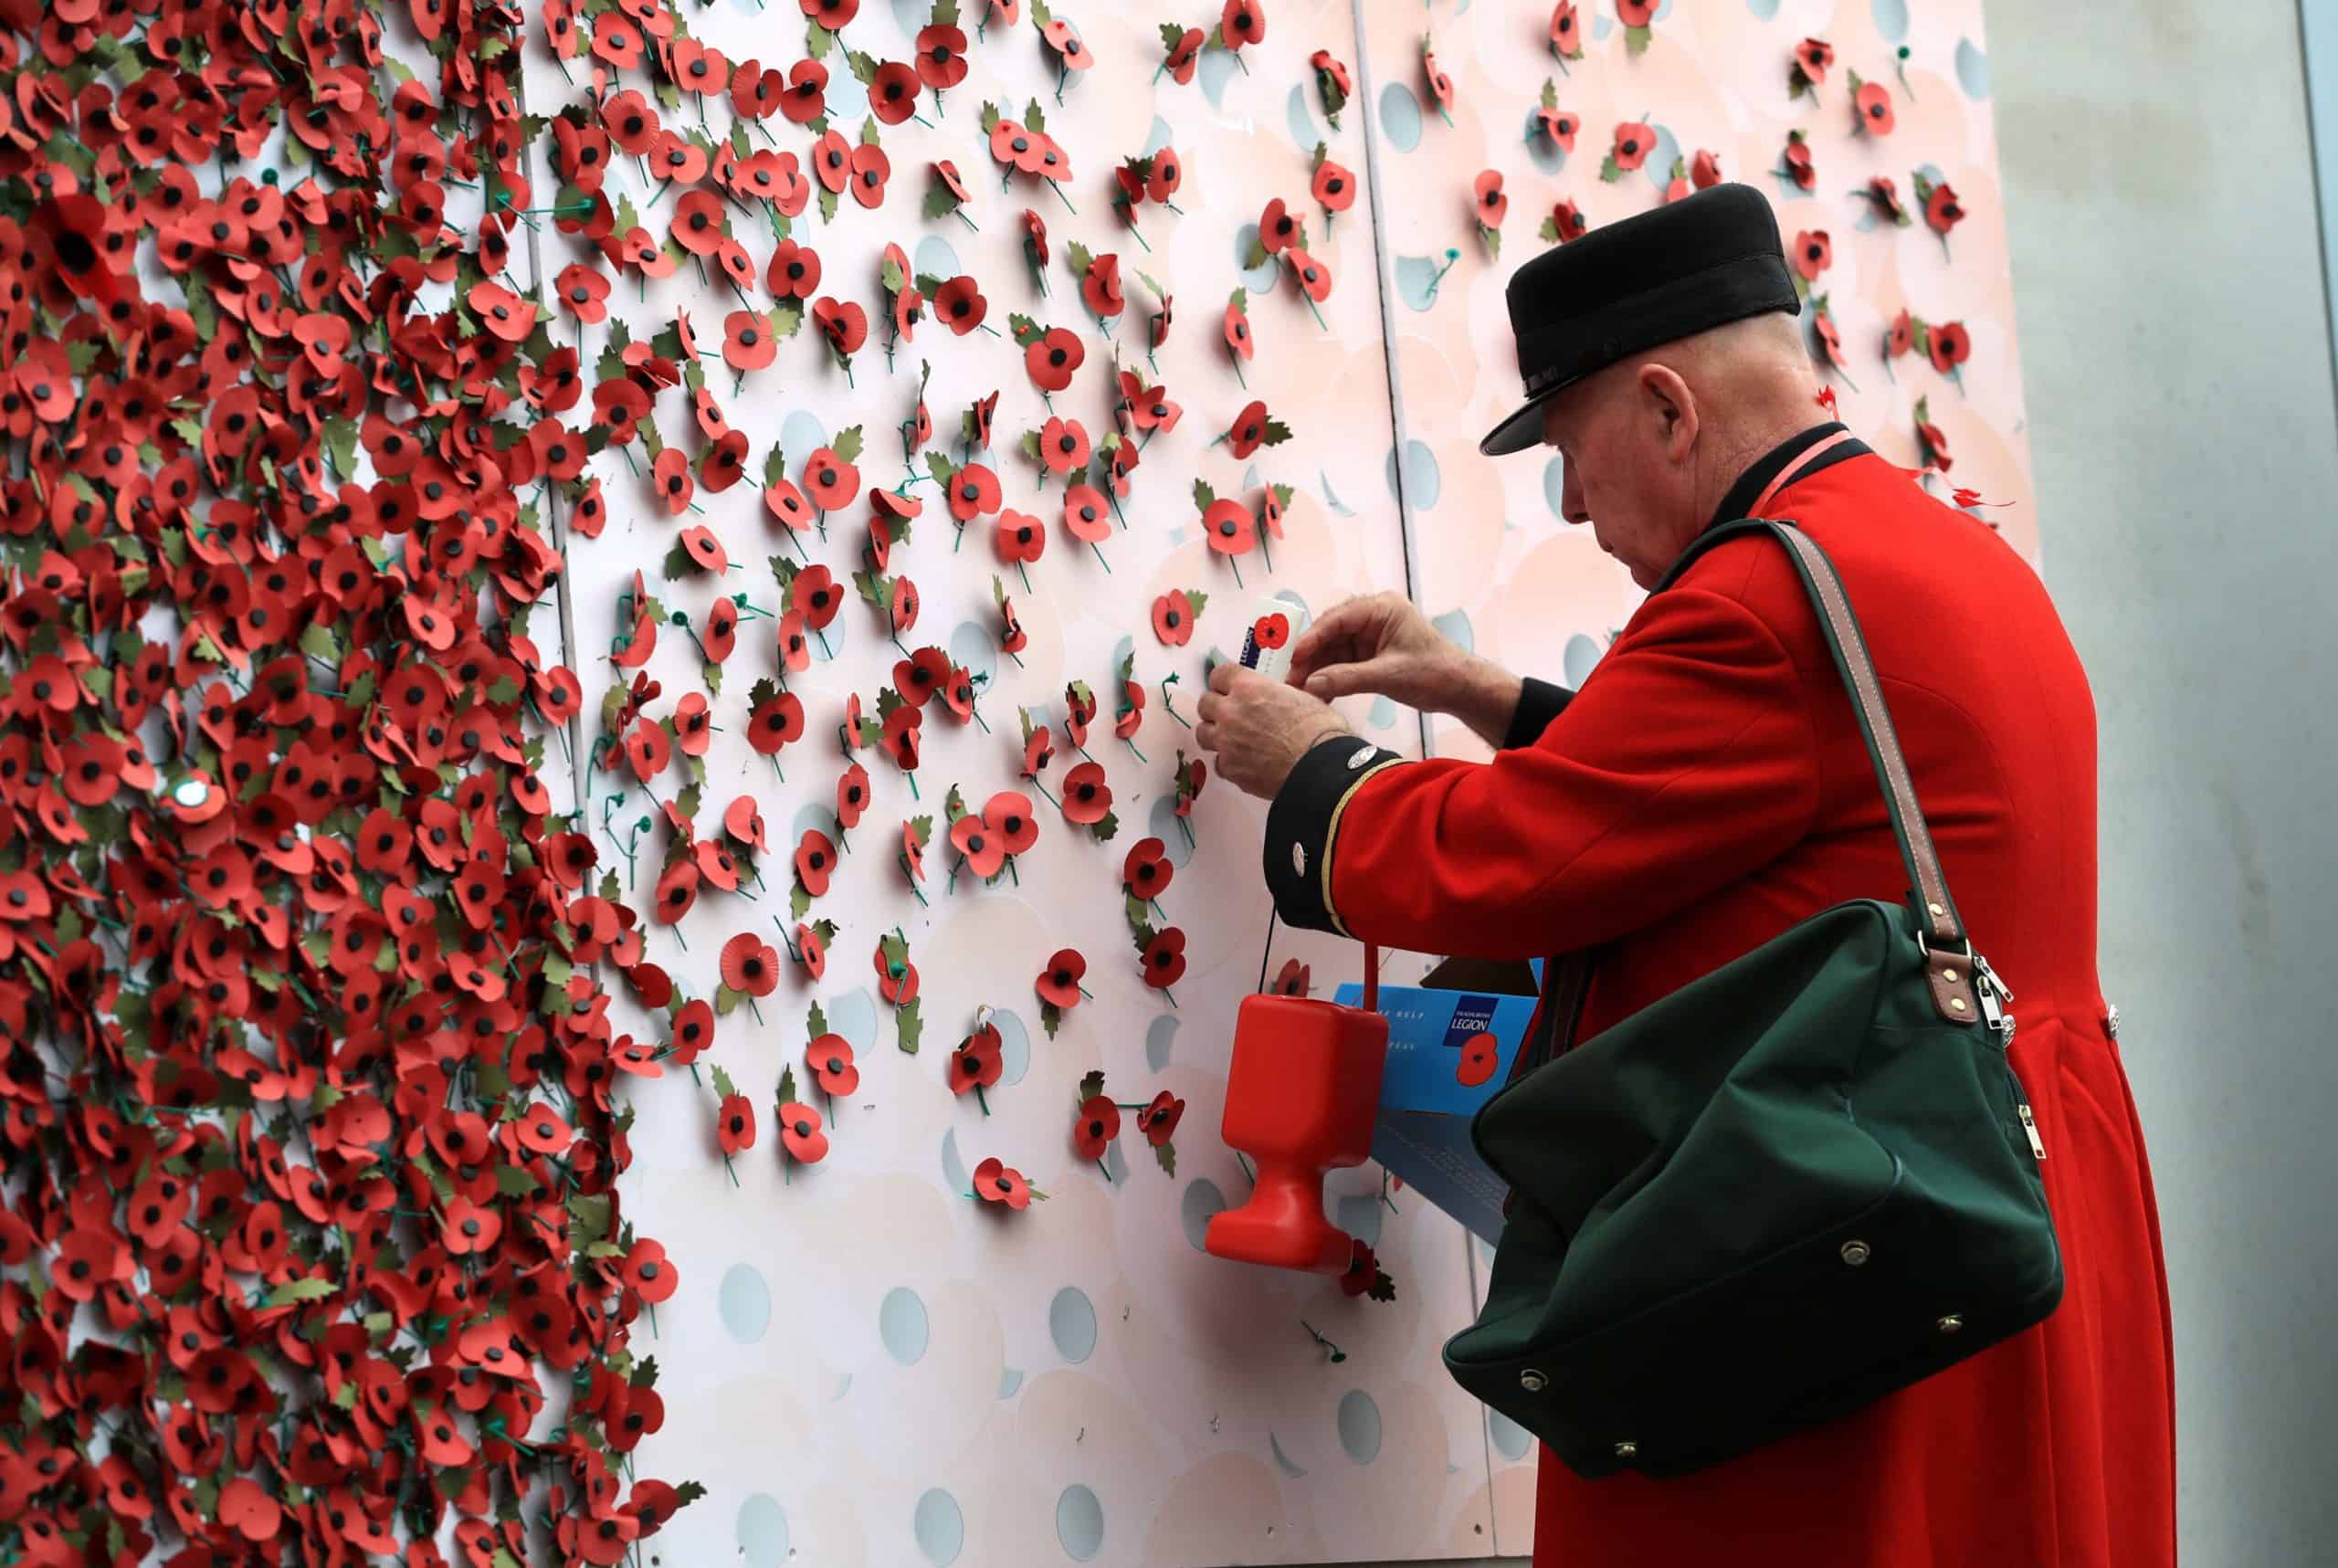 Brexit: The Royal British Legion will no longer sell poppies in the EU due to red tape